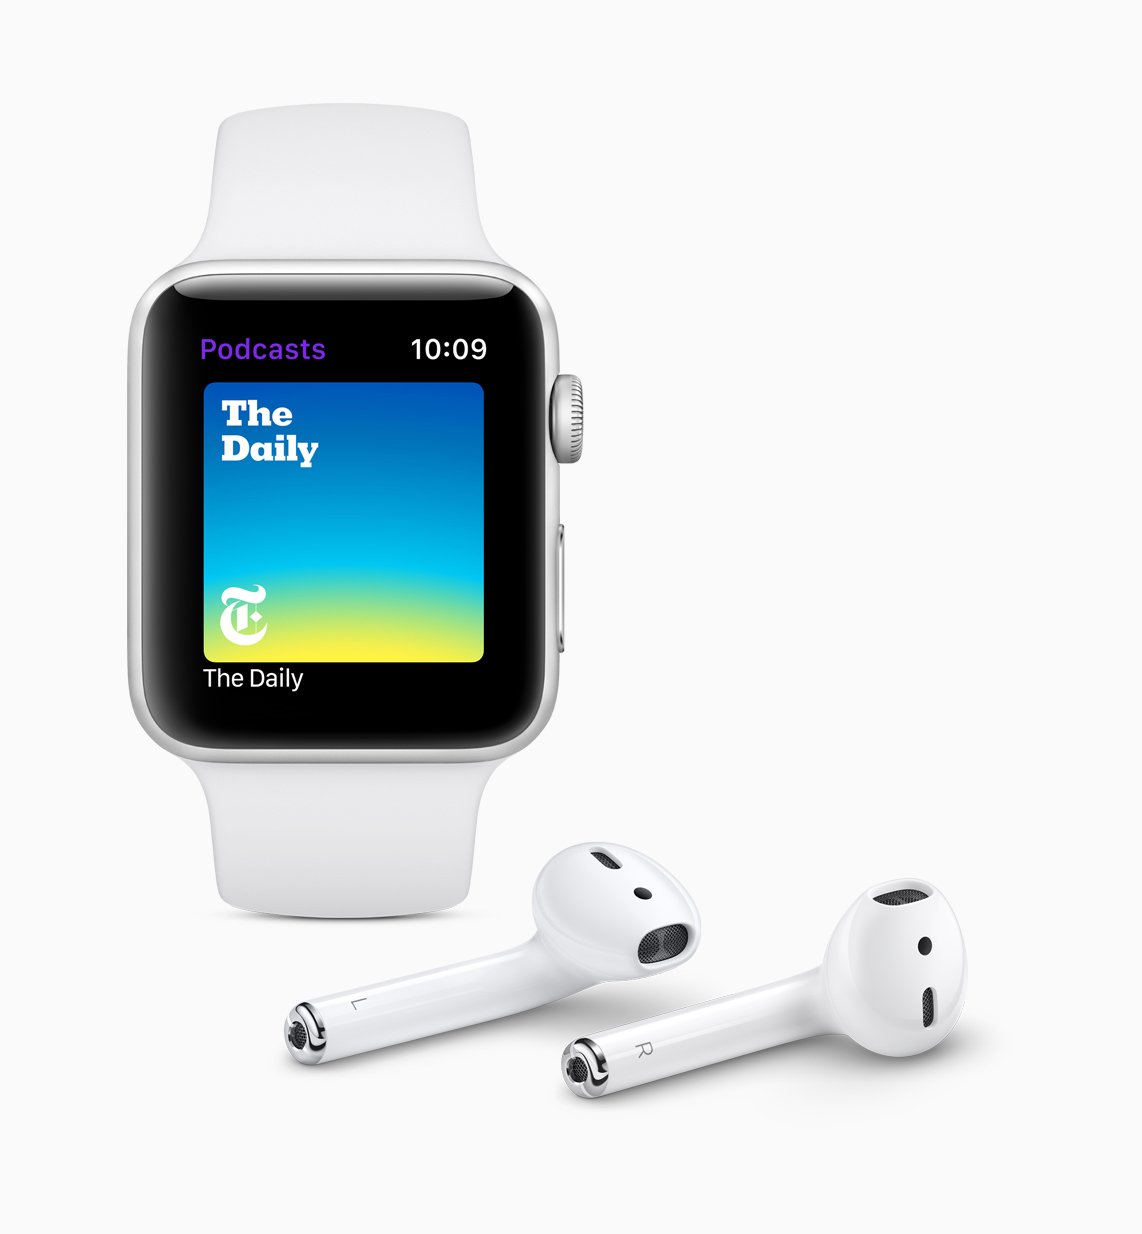 Apple-watchOS_5-Podcasts-screen-06042018